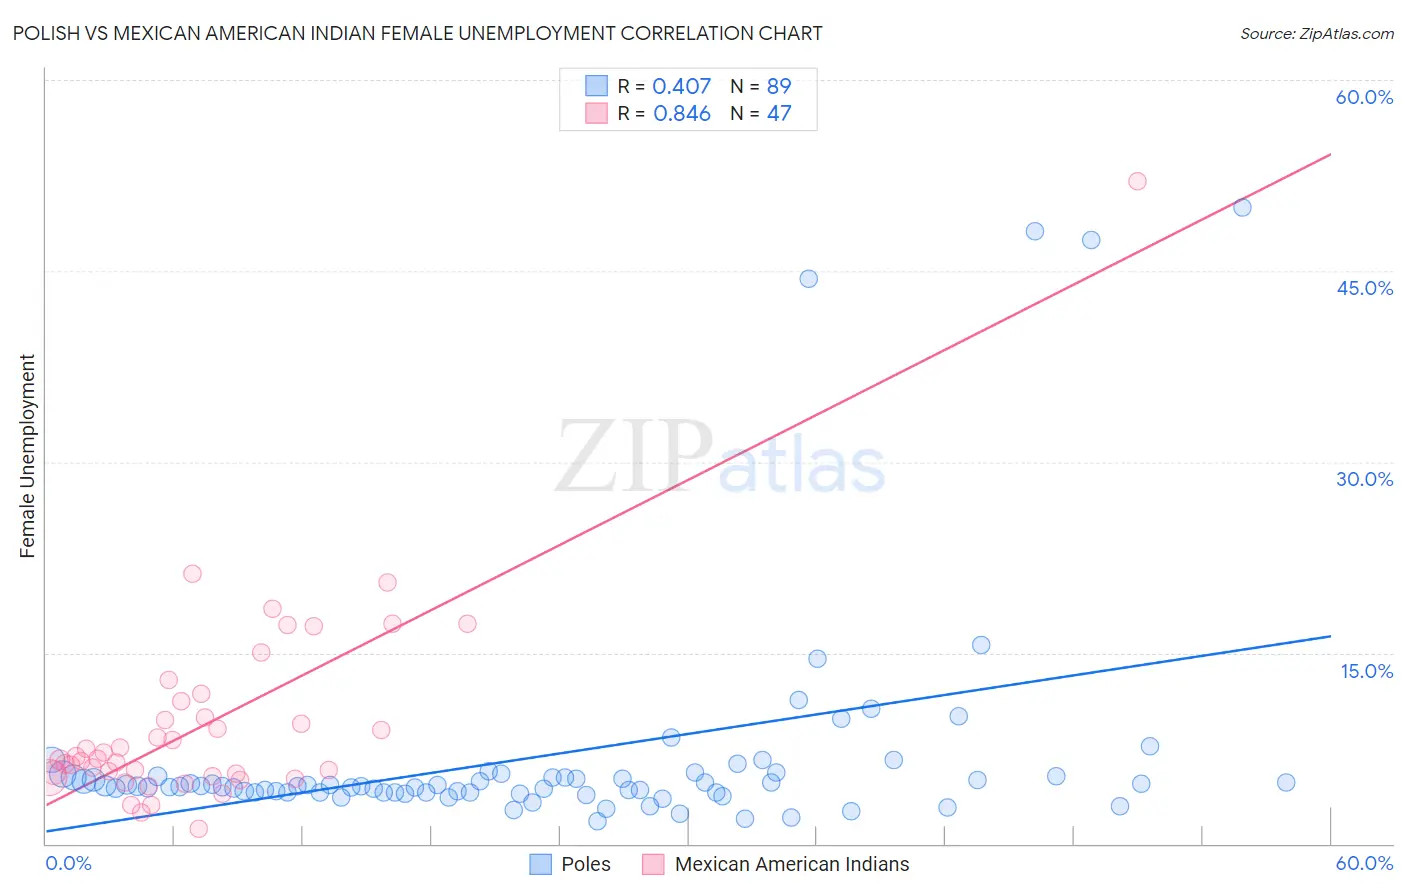 Polish vs Mexican American Indian Female Unemployment